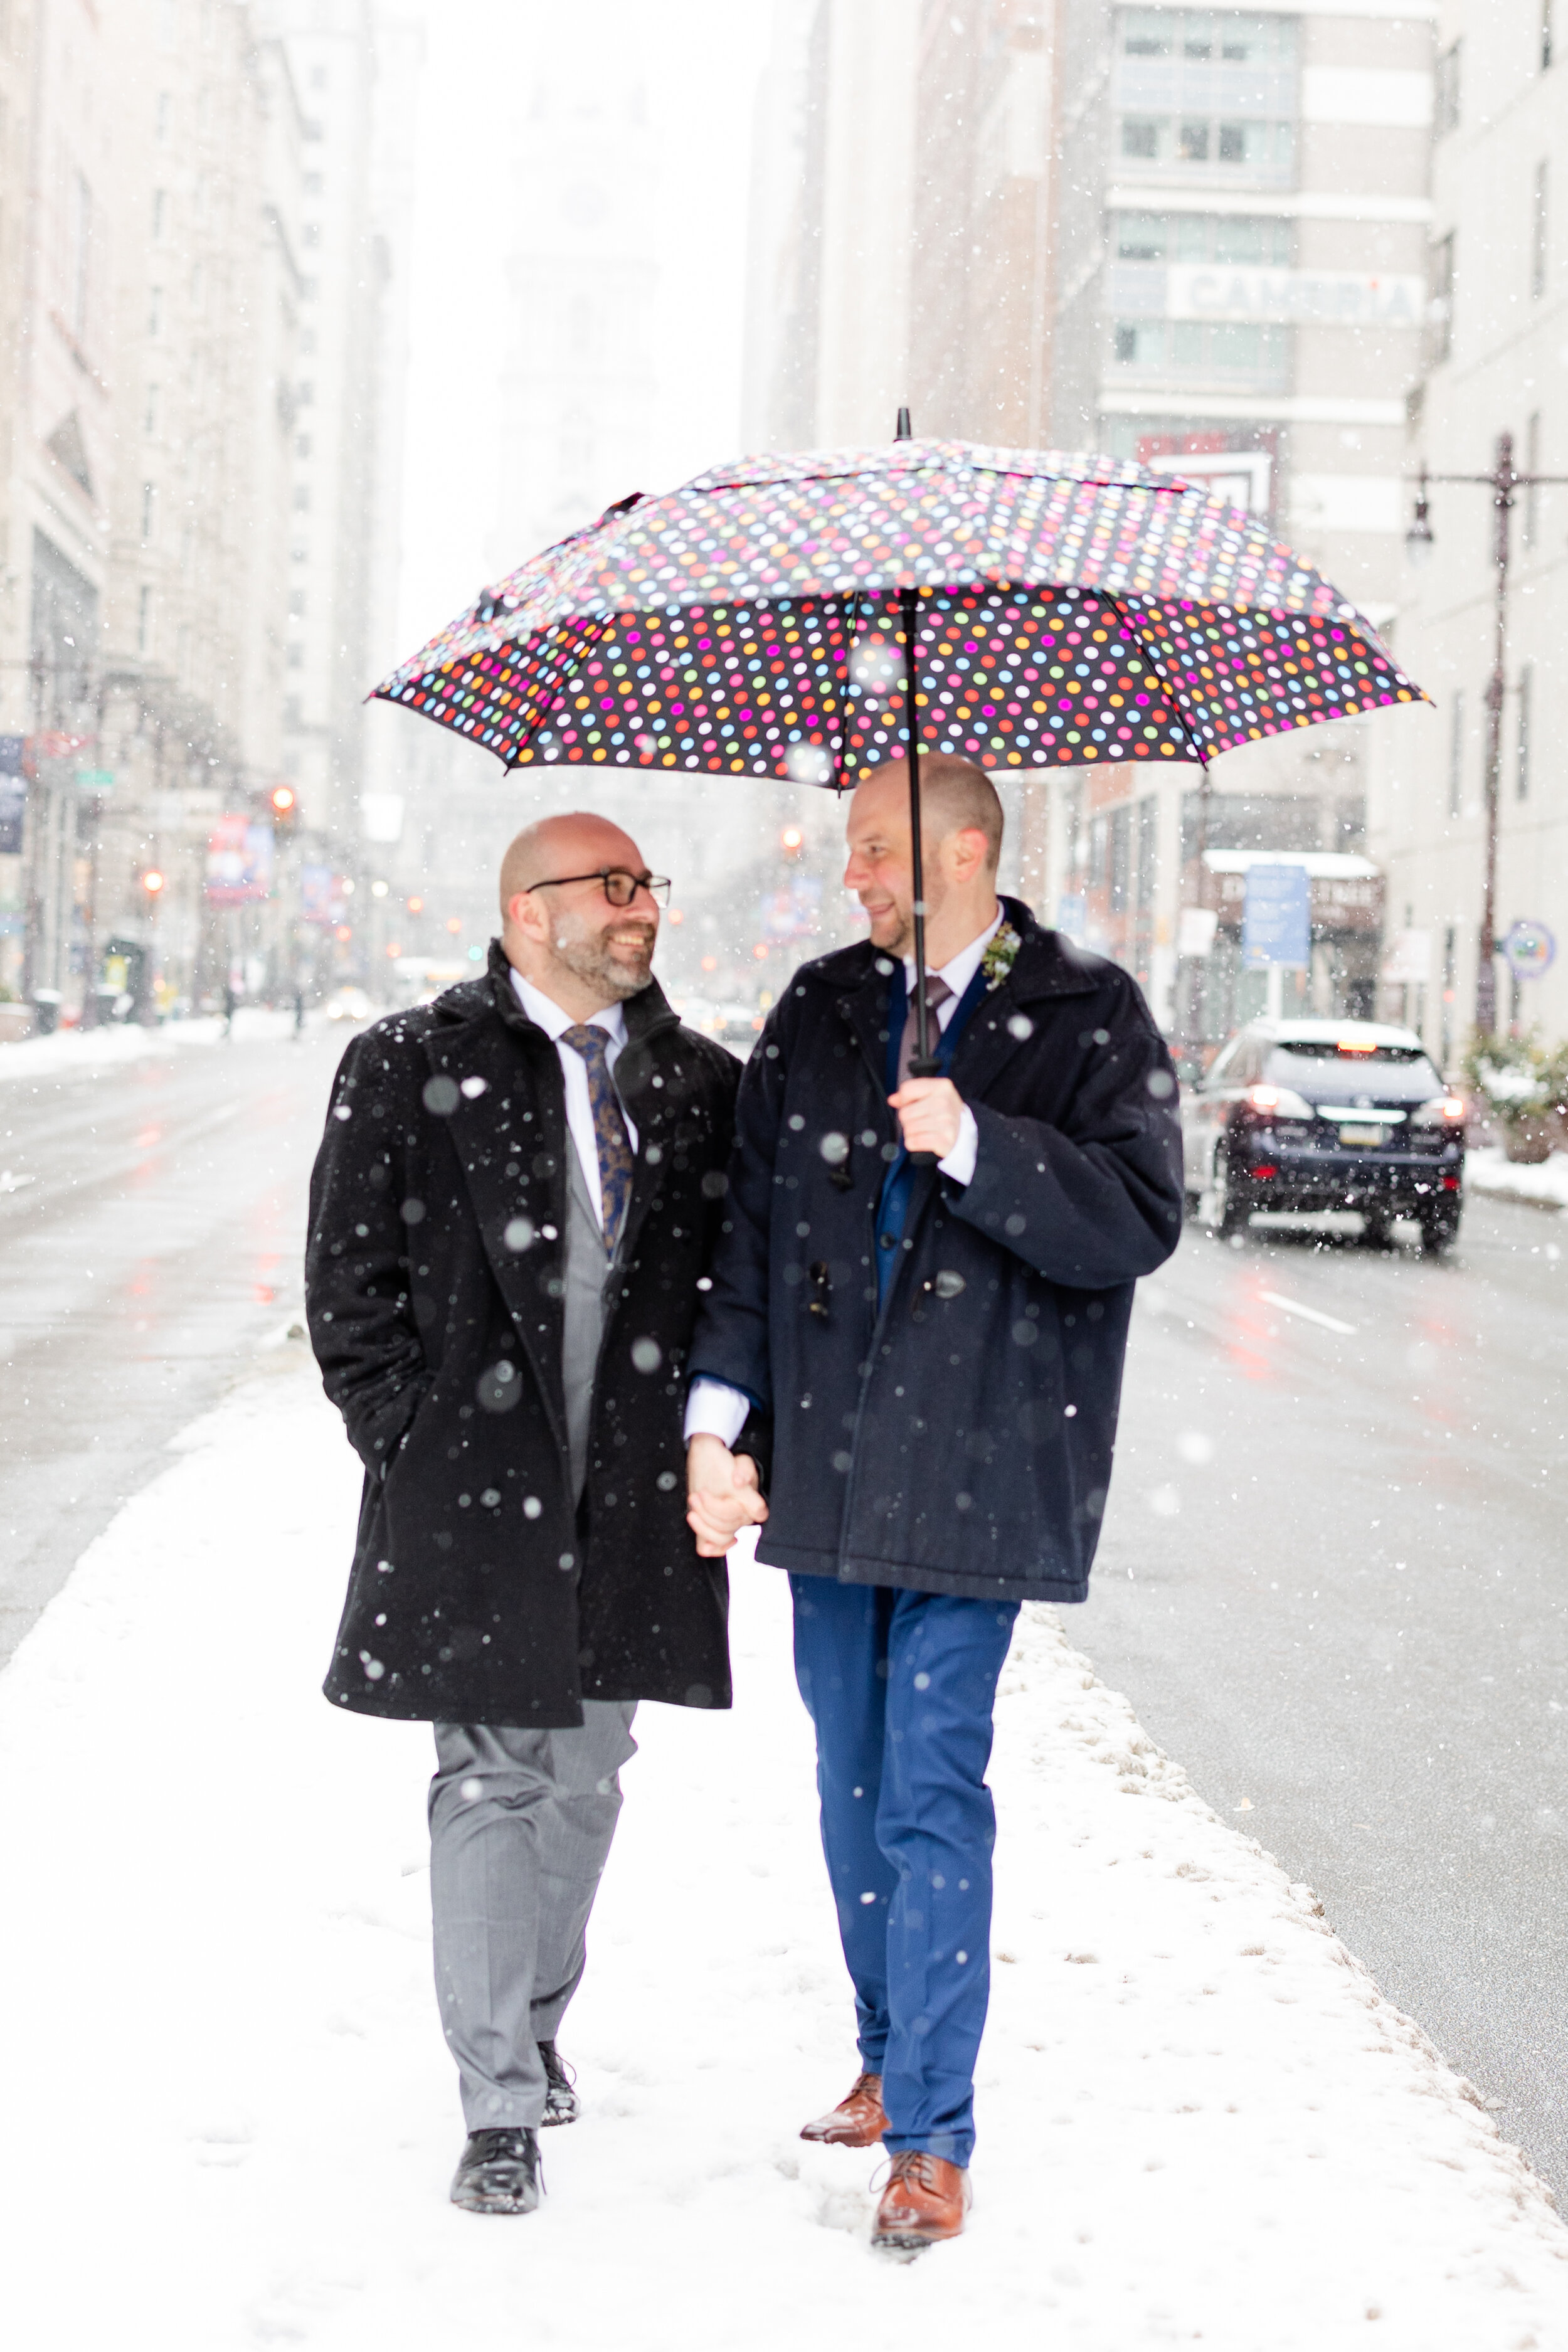 Curtis-and-Bill-Snowy-Vaux-Philly-Elopement-30.jpg